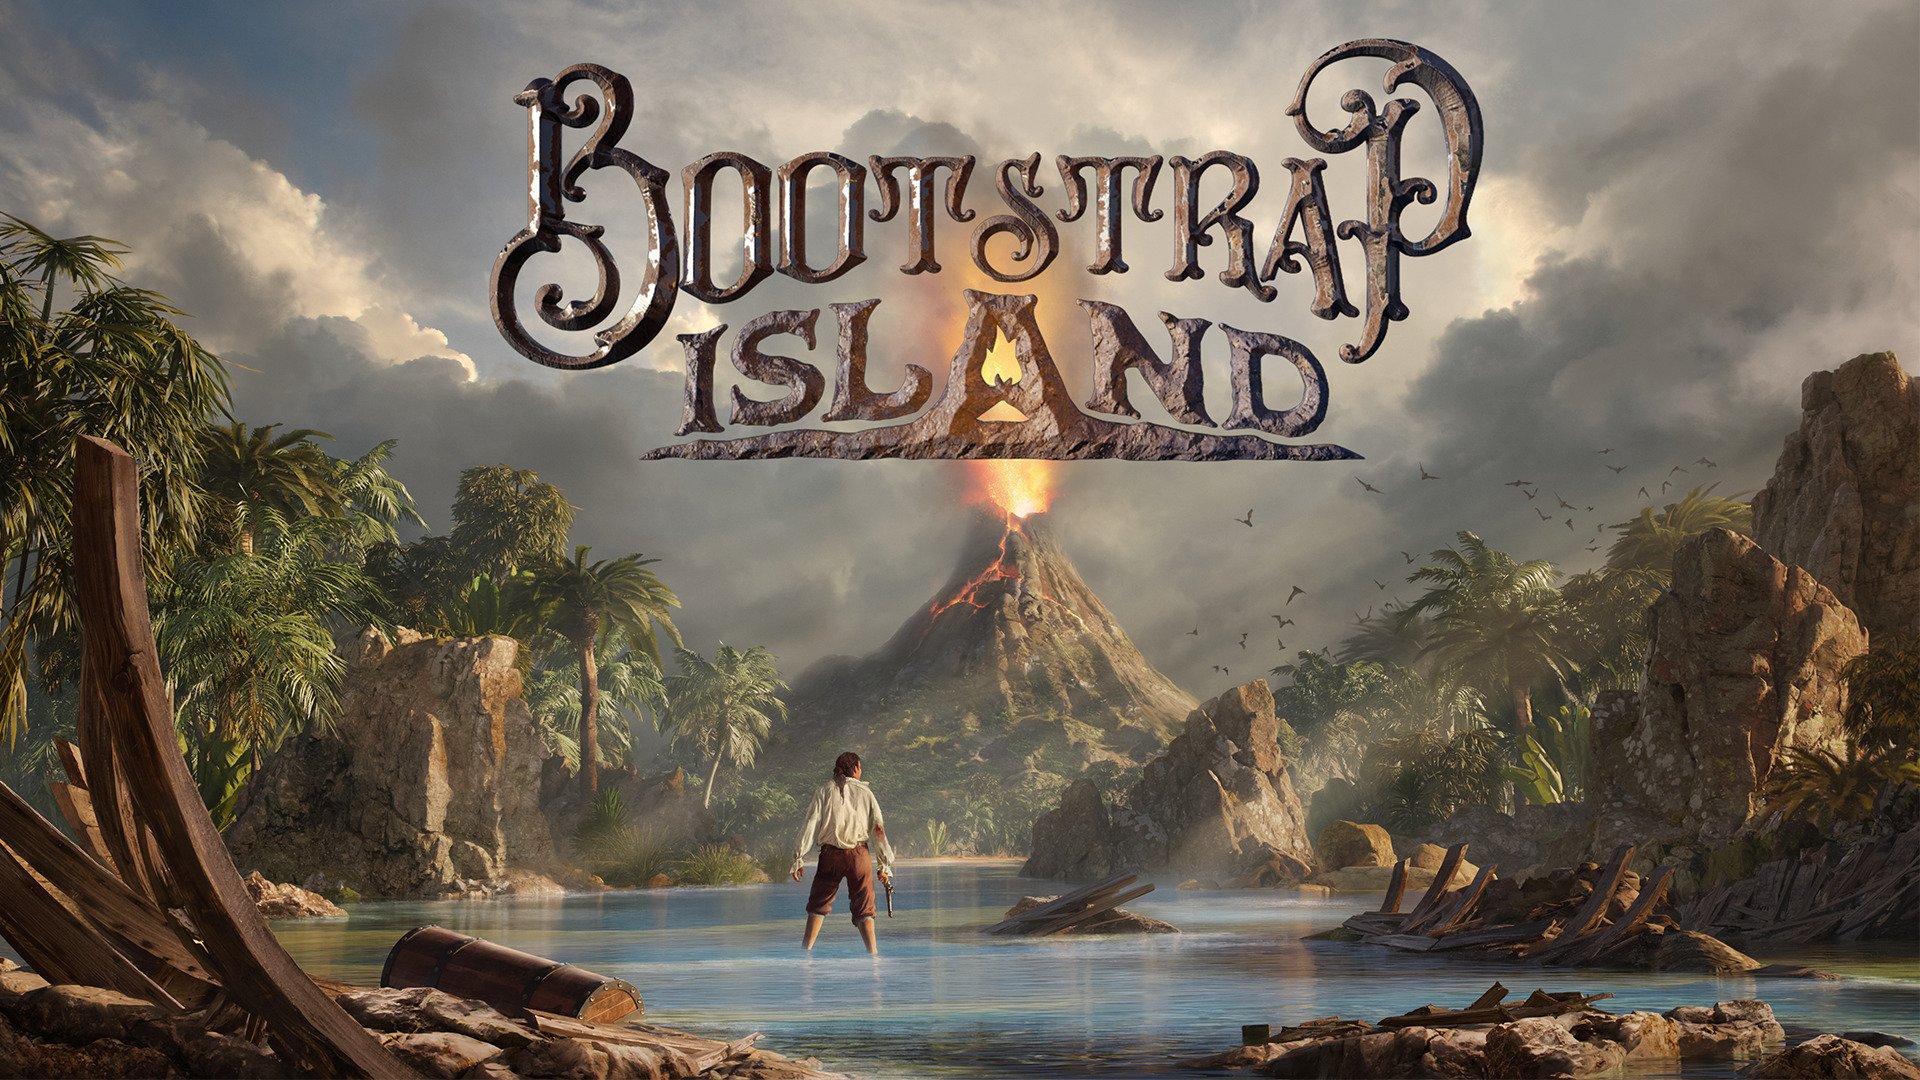 A man standing in water looking around for escape. Image is a poster of game Bootstrap Island.